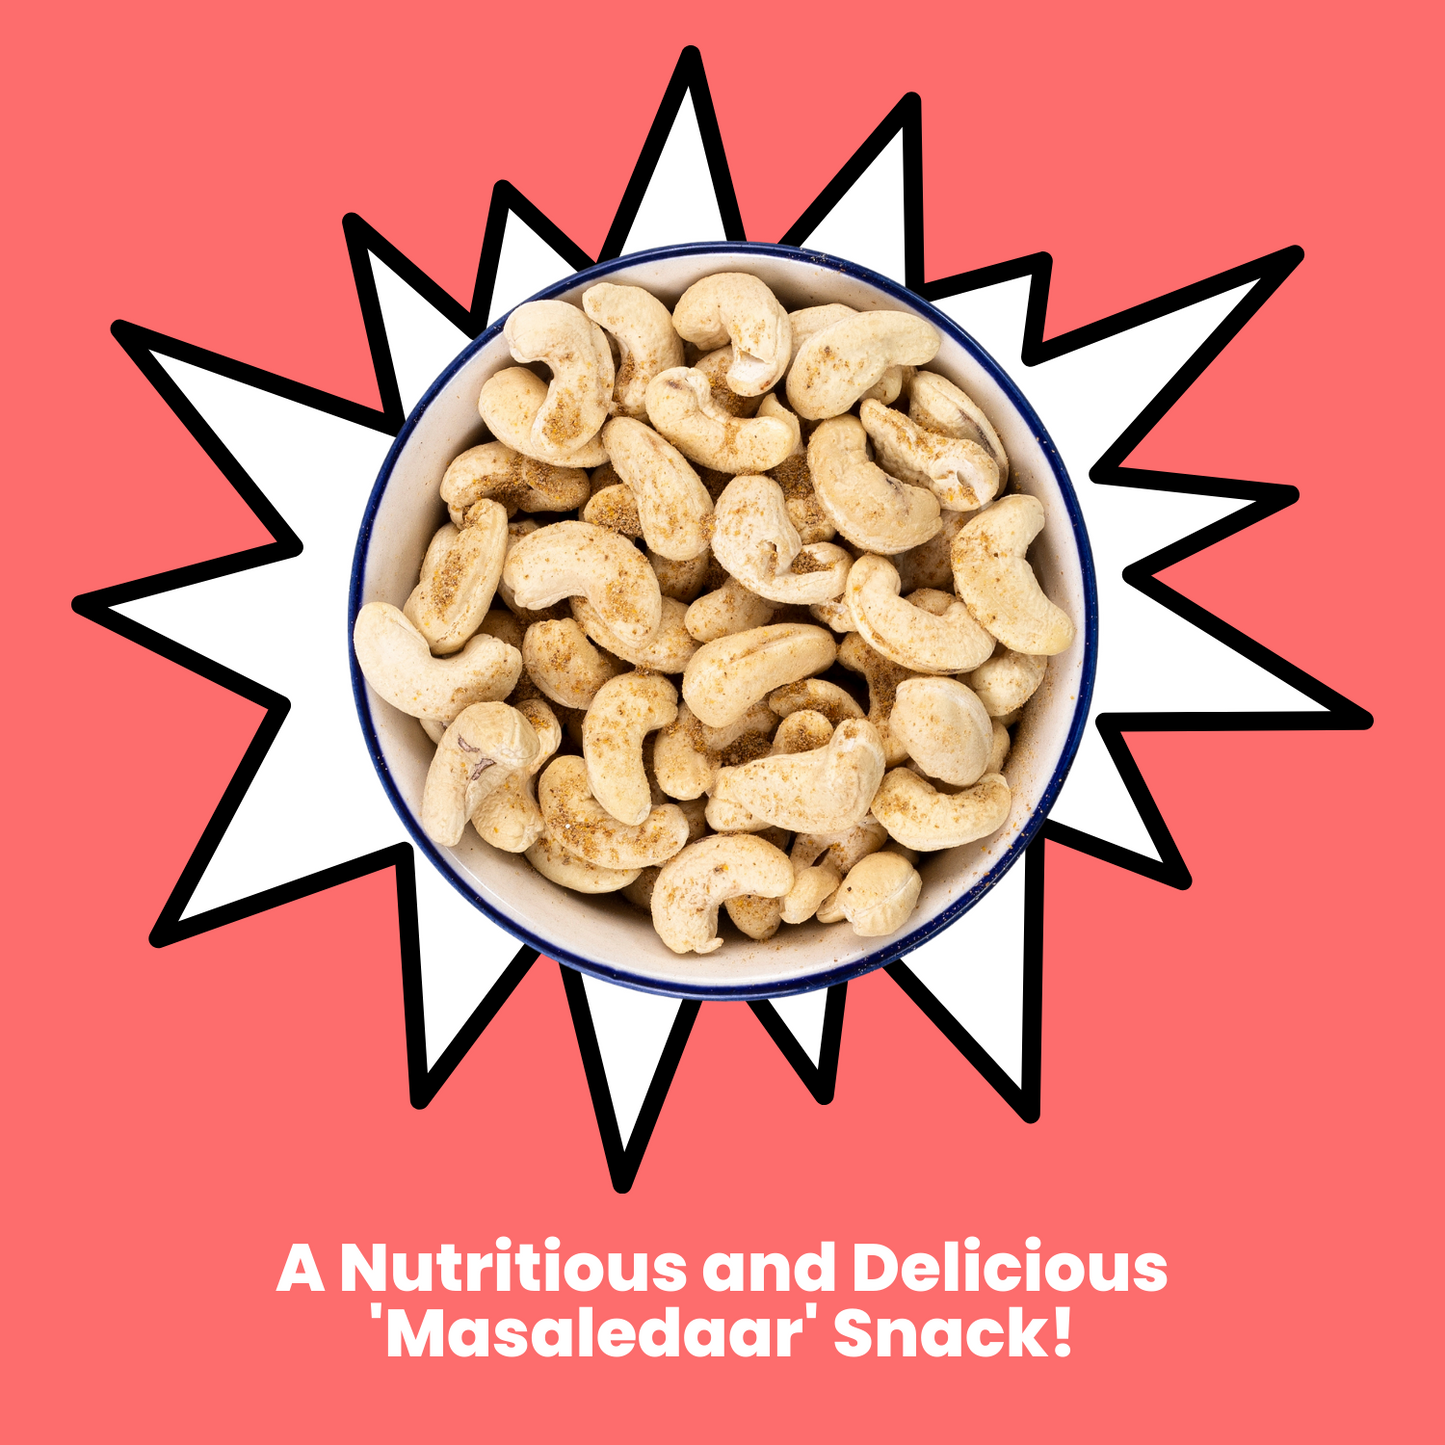 Premium Masala Cashews - 250g Pouch - Healthy Snack - Nutritious, Delicious, Dry Fruit, Nuts, Spicy